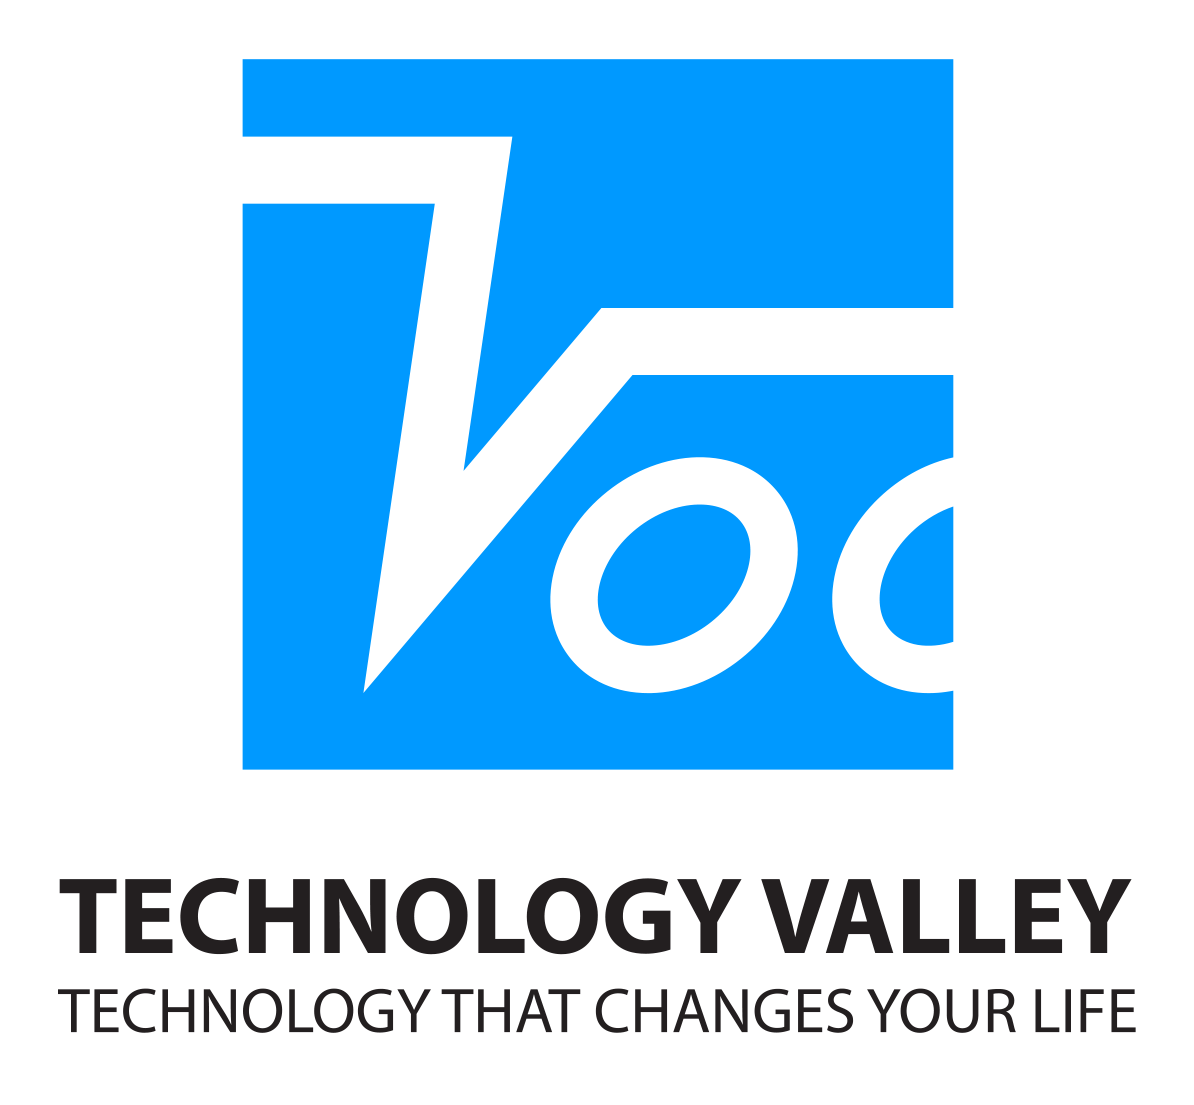 Technology Valley - Technology that changes your life